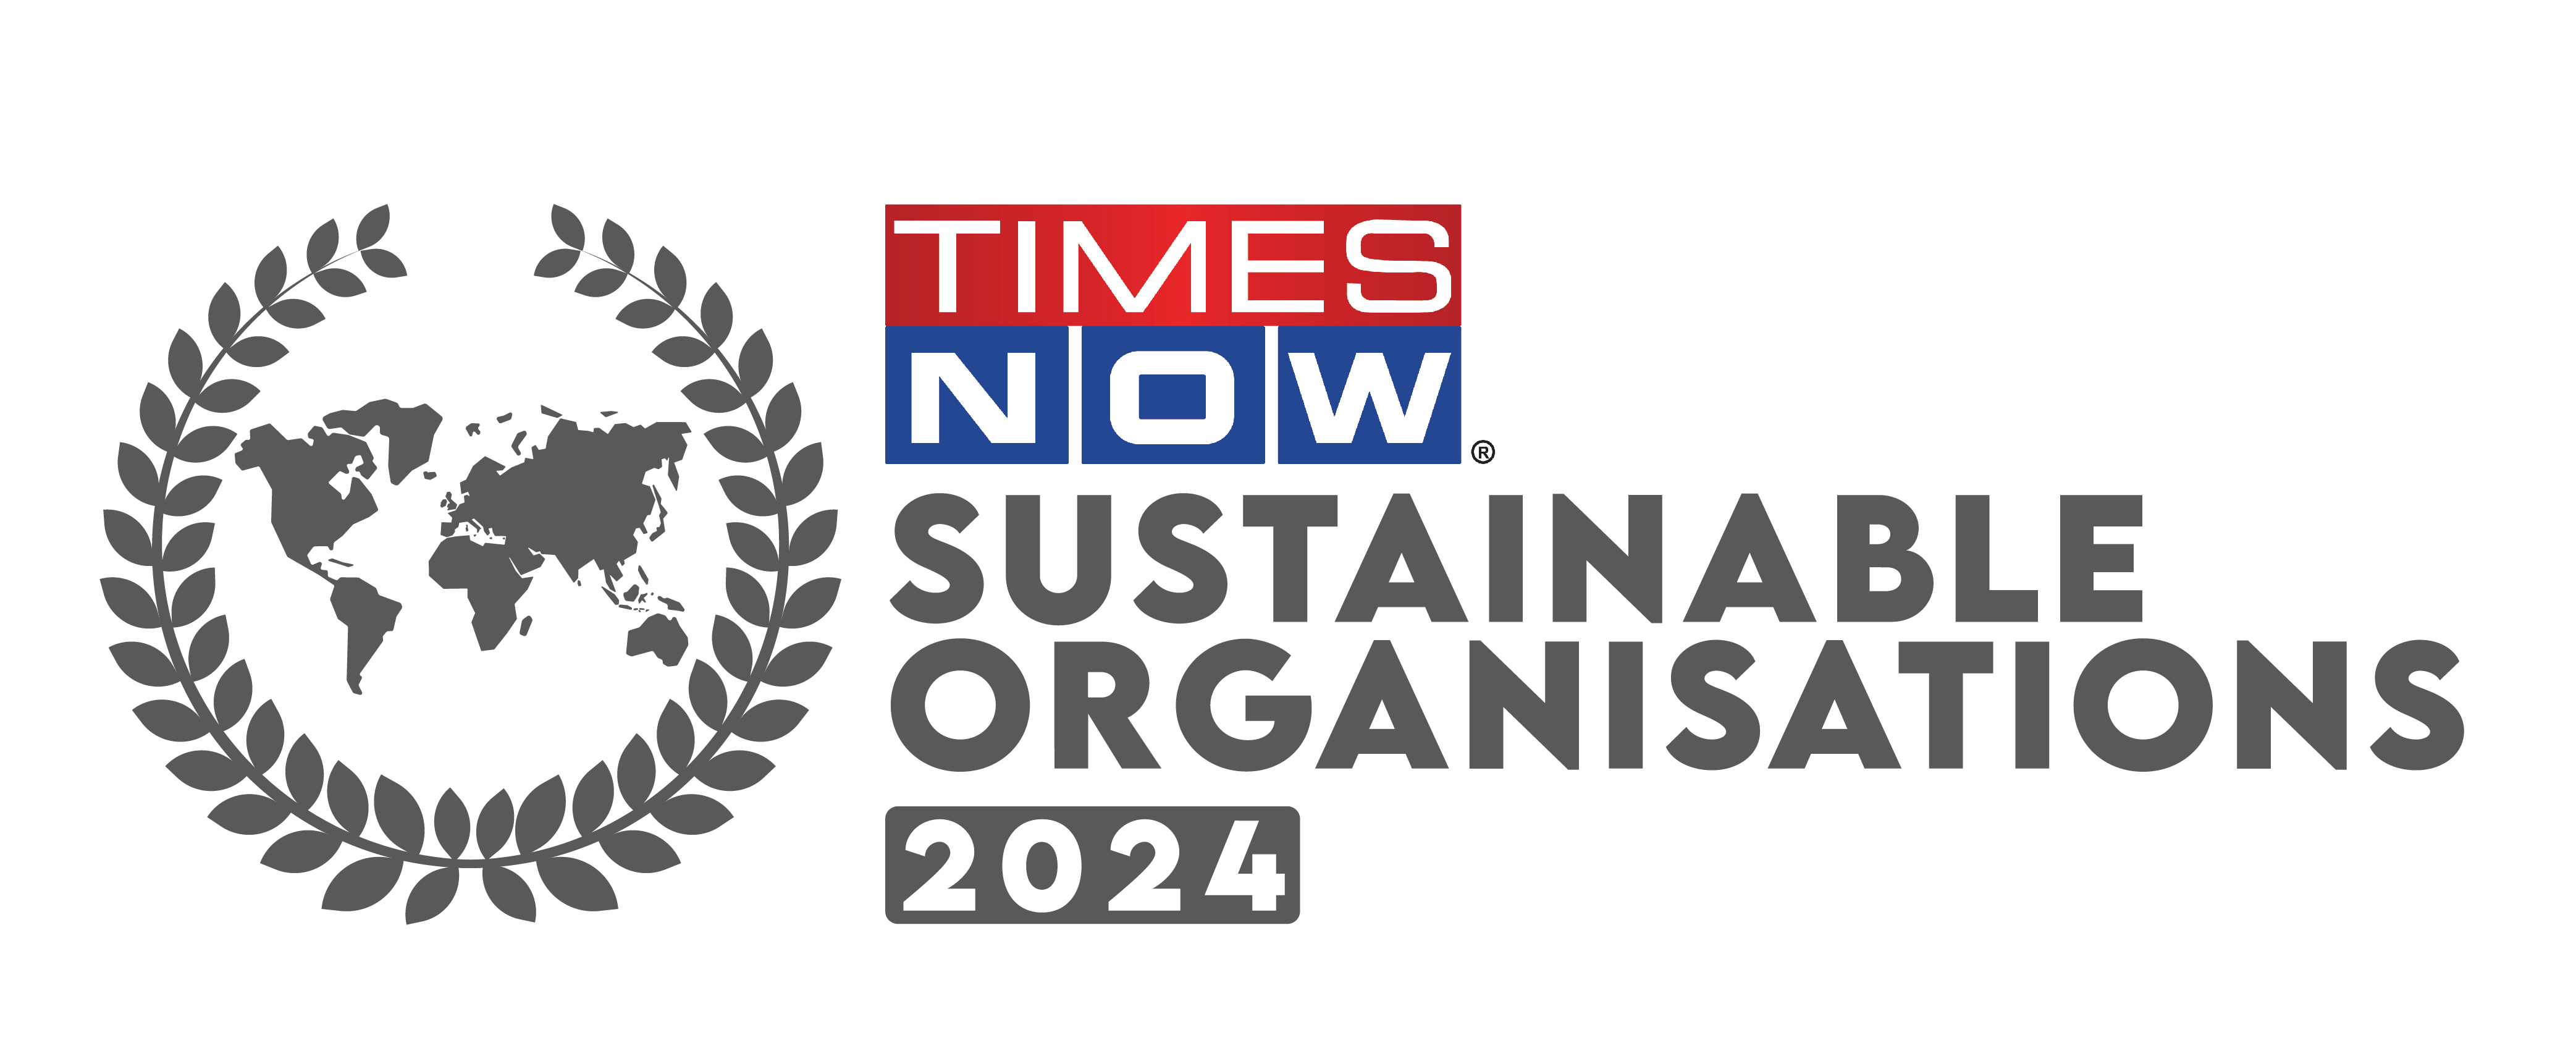 Times Now Sustainable Organisation 2024